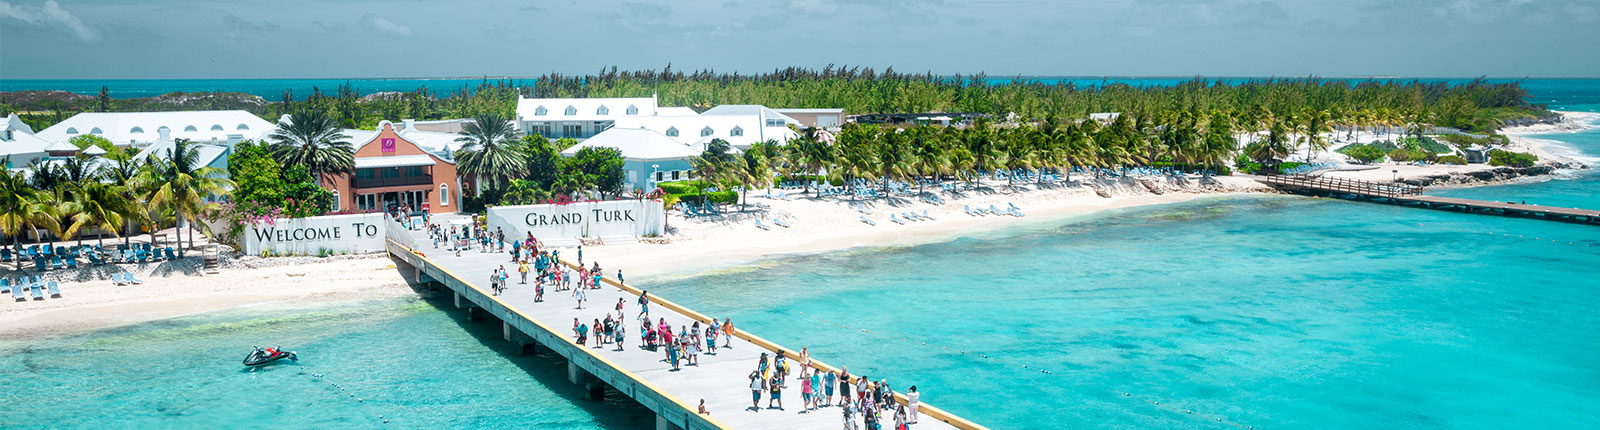 6 day eastern caribbean cruise carnival from miami